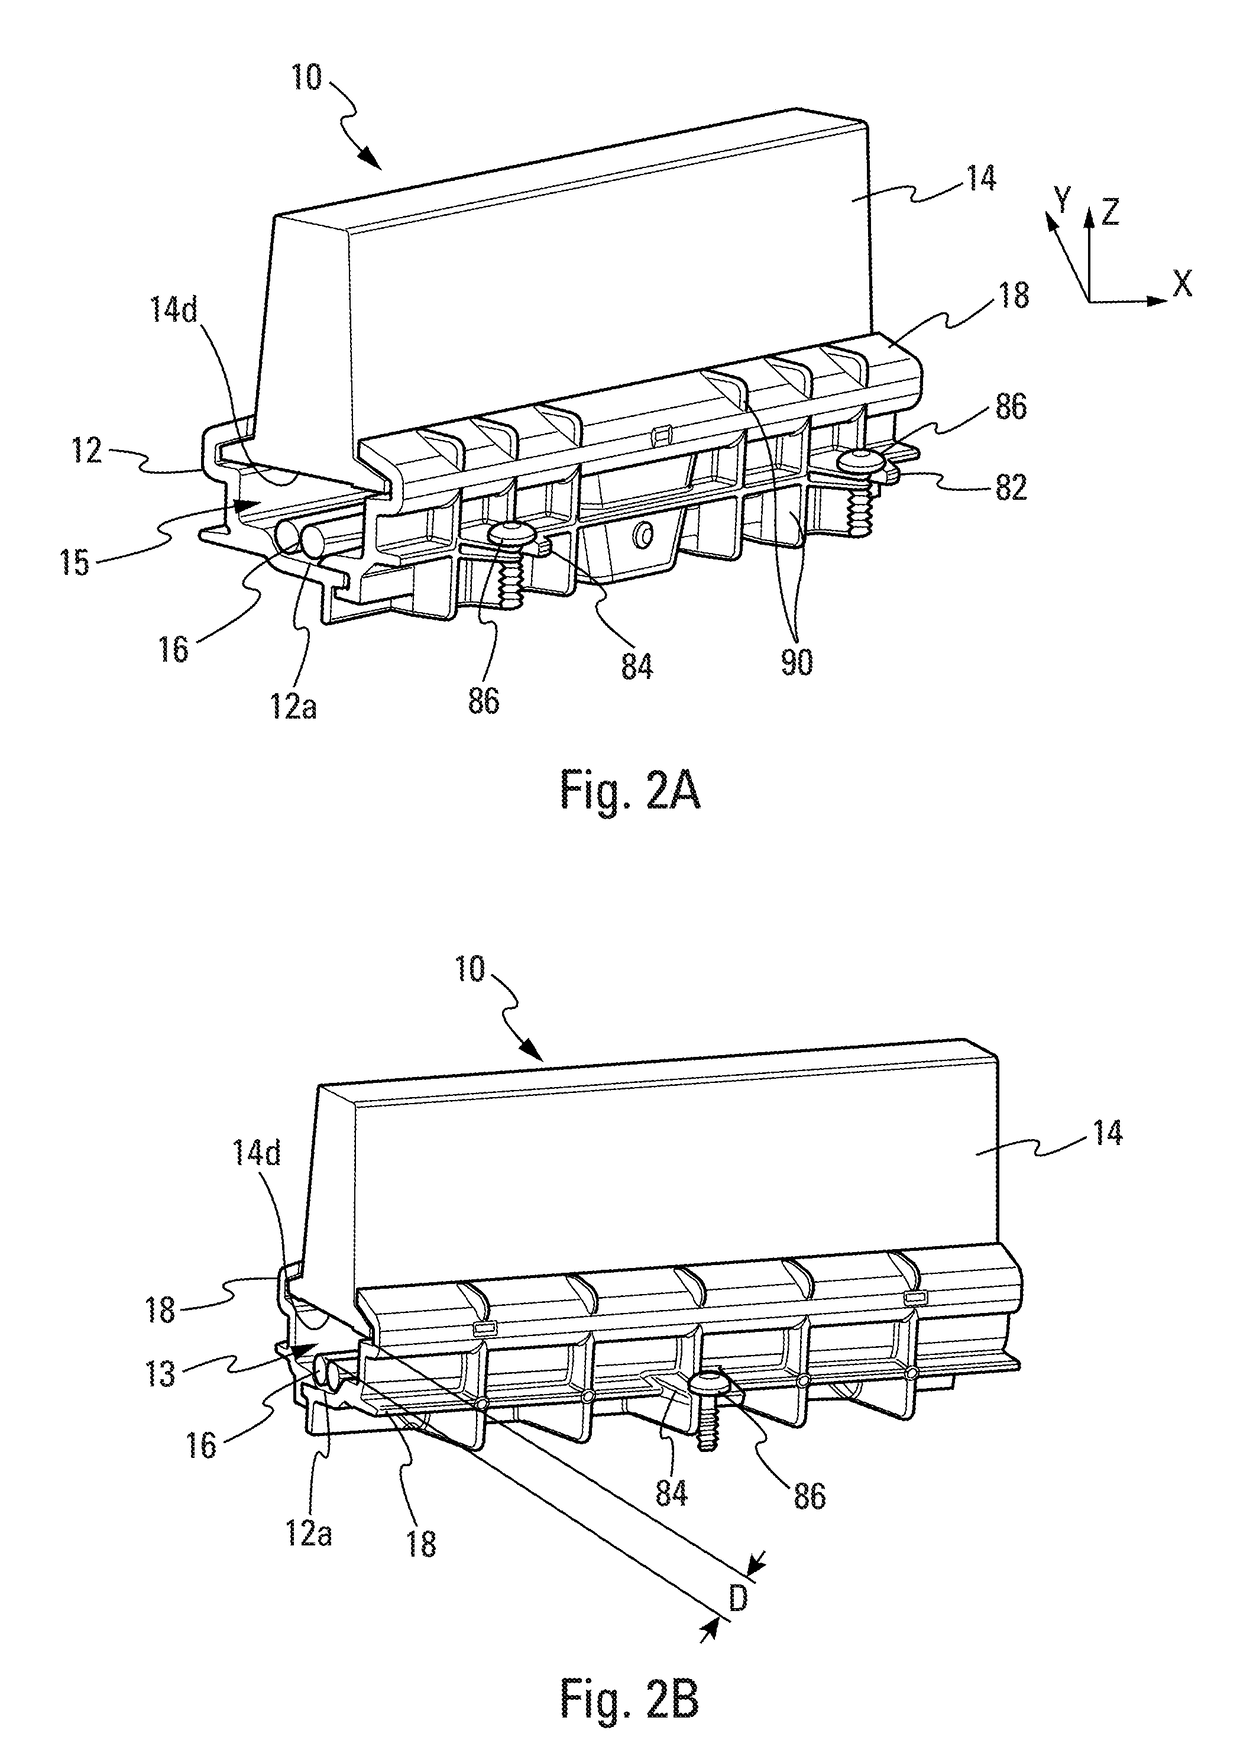 Lighting assembly for use on a vehicle